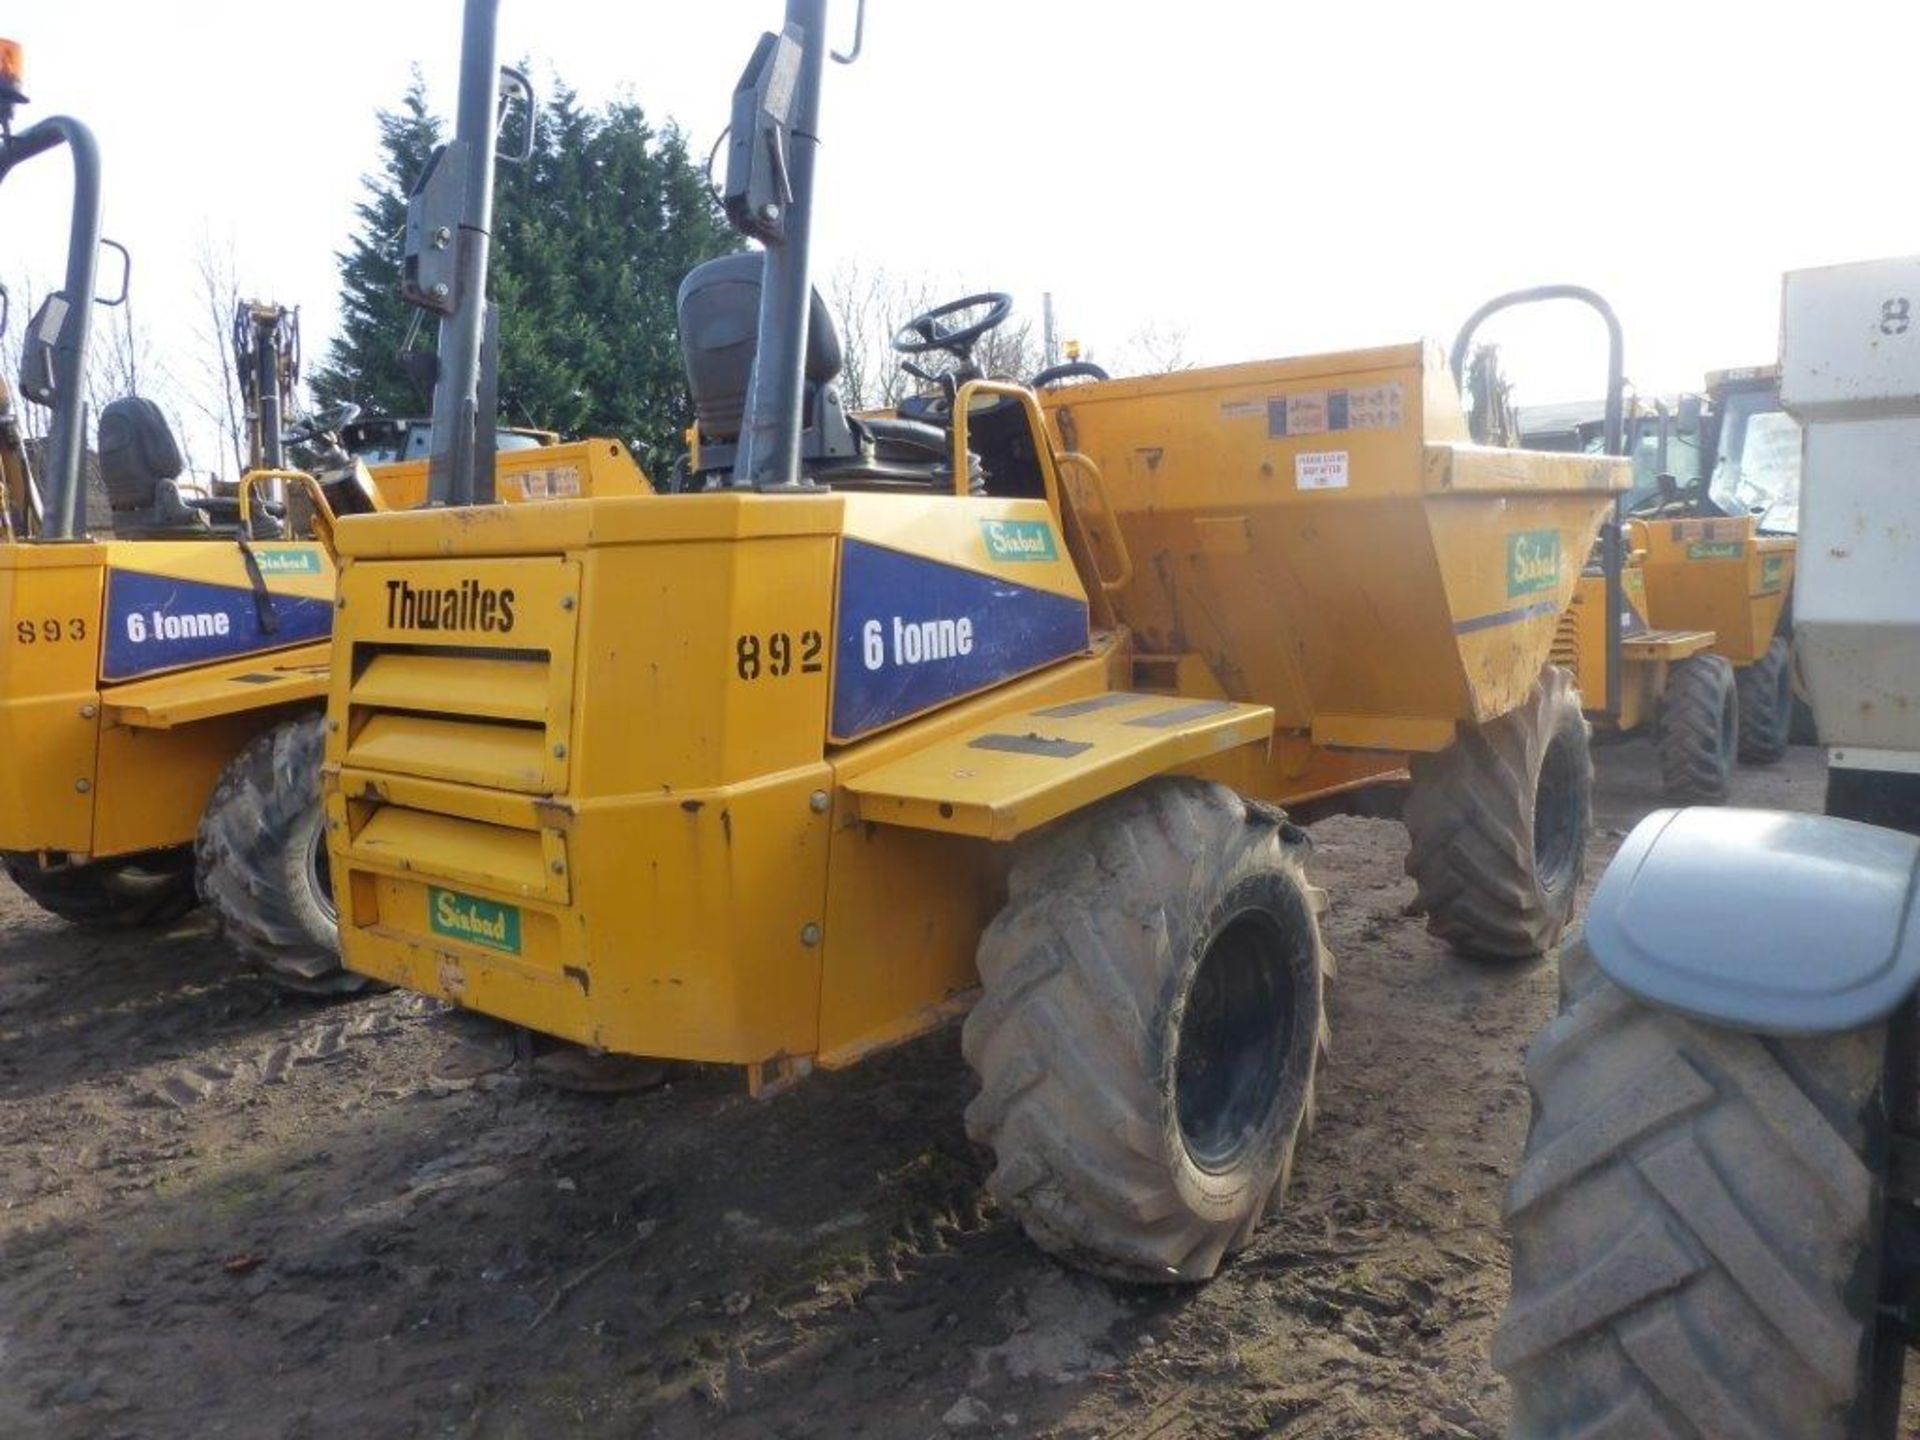 Thwaites 6-tonne 4x4 articulated dumper (2007), indicated hours 1533.1, weight 4160Kg, VIN no. - Image 4 of 6